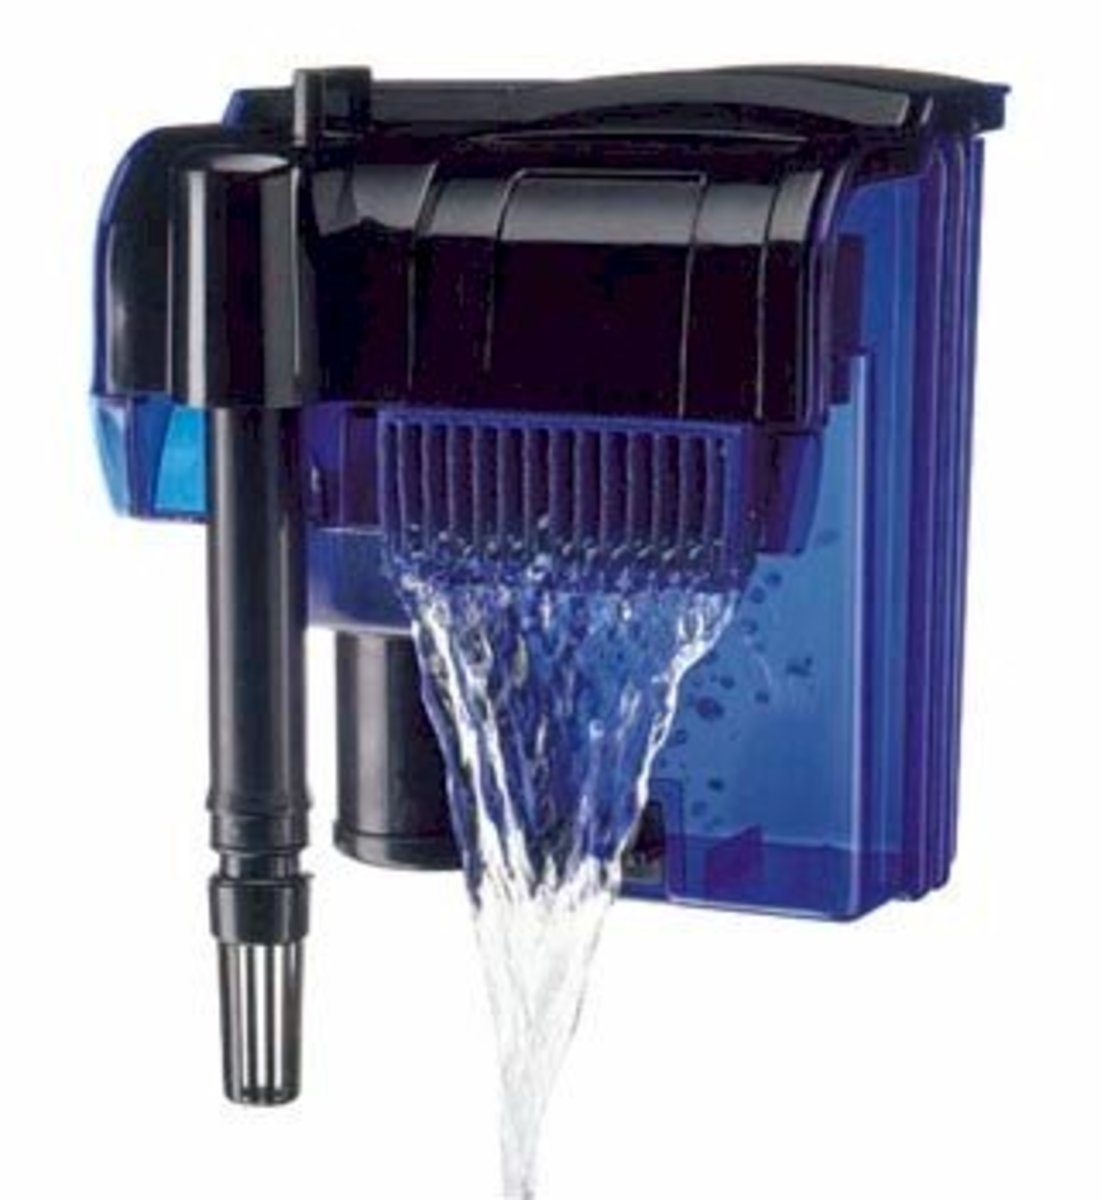 Make sure you purchase a high-quality yet gentle filtration system.